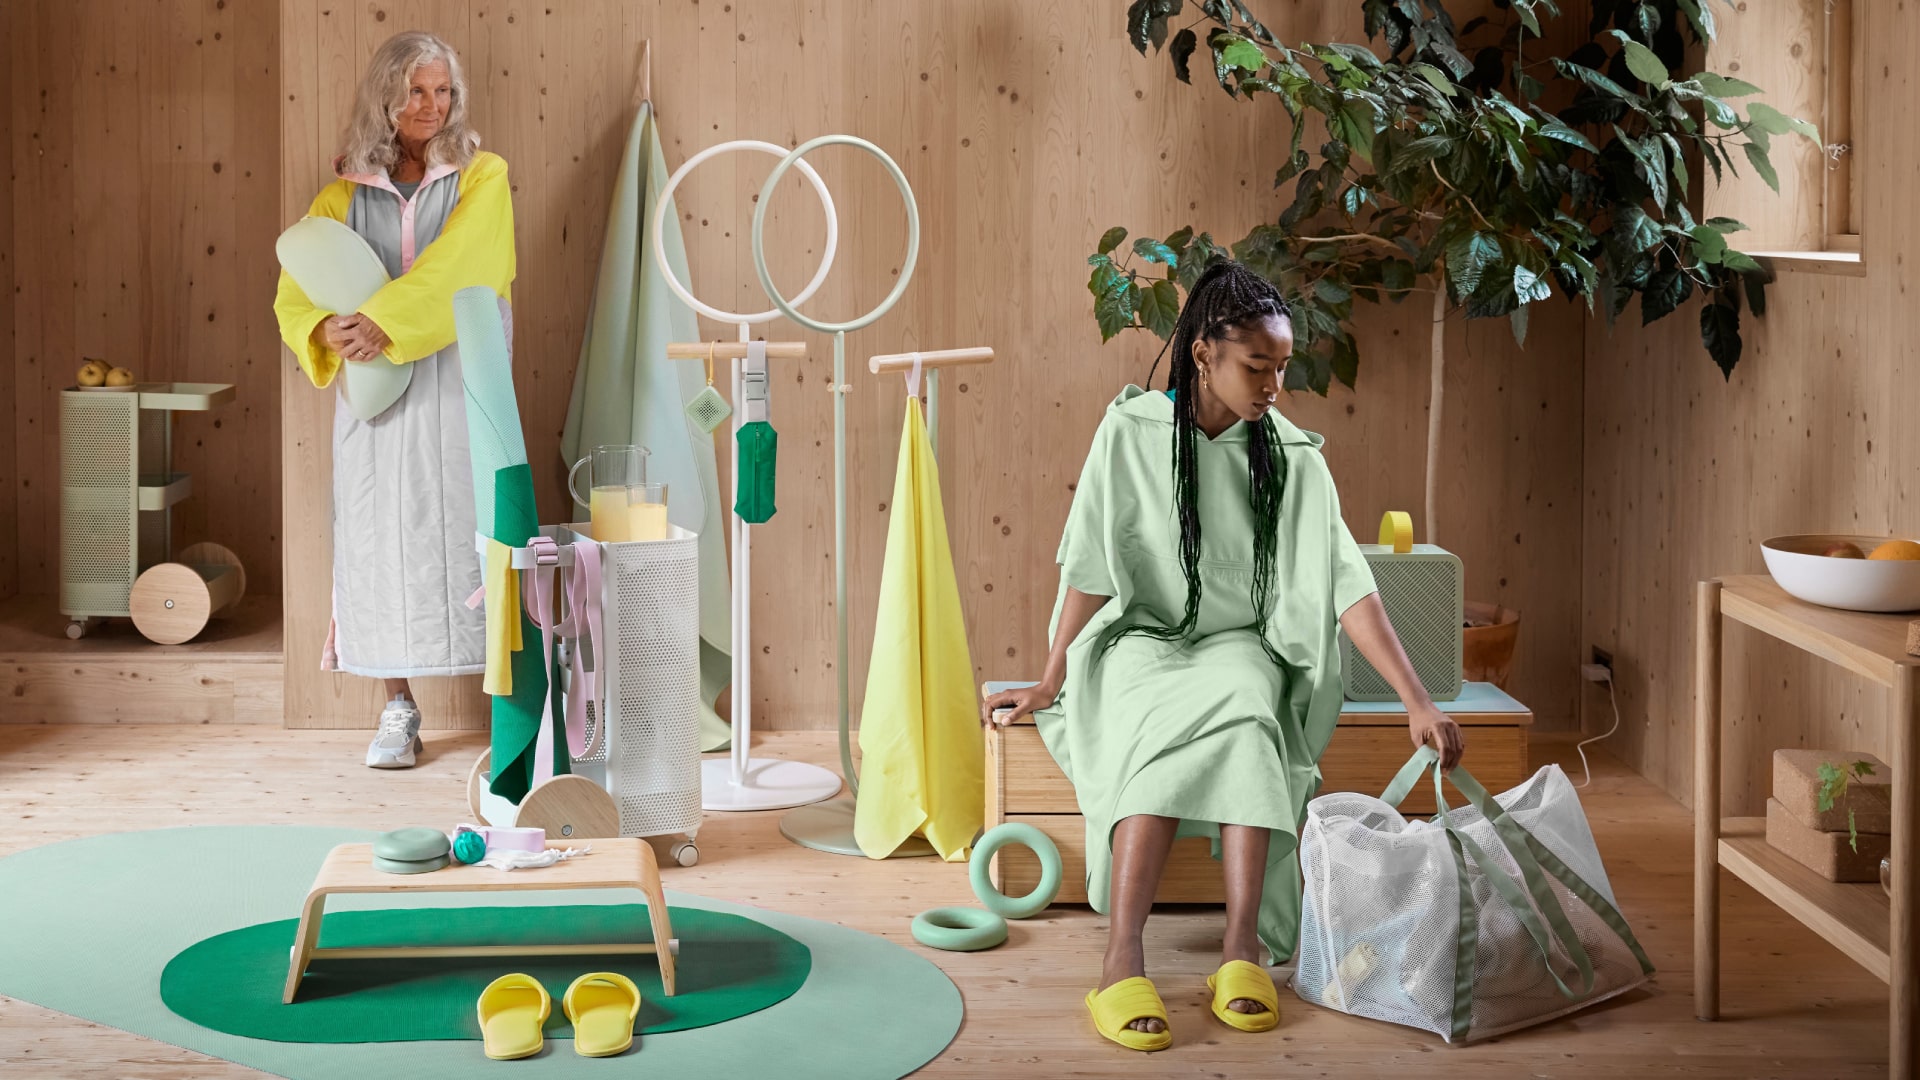 Ikeas New Fitness Range Lets You Work Out In Style Techradar